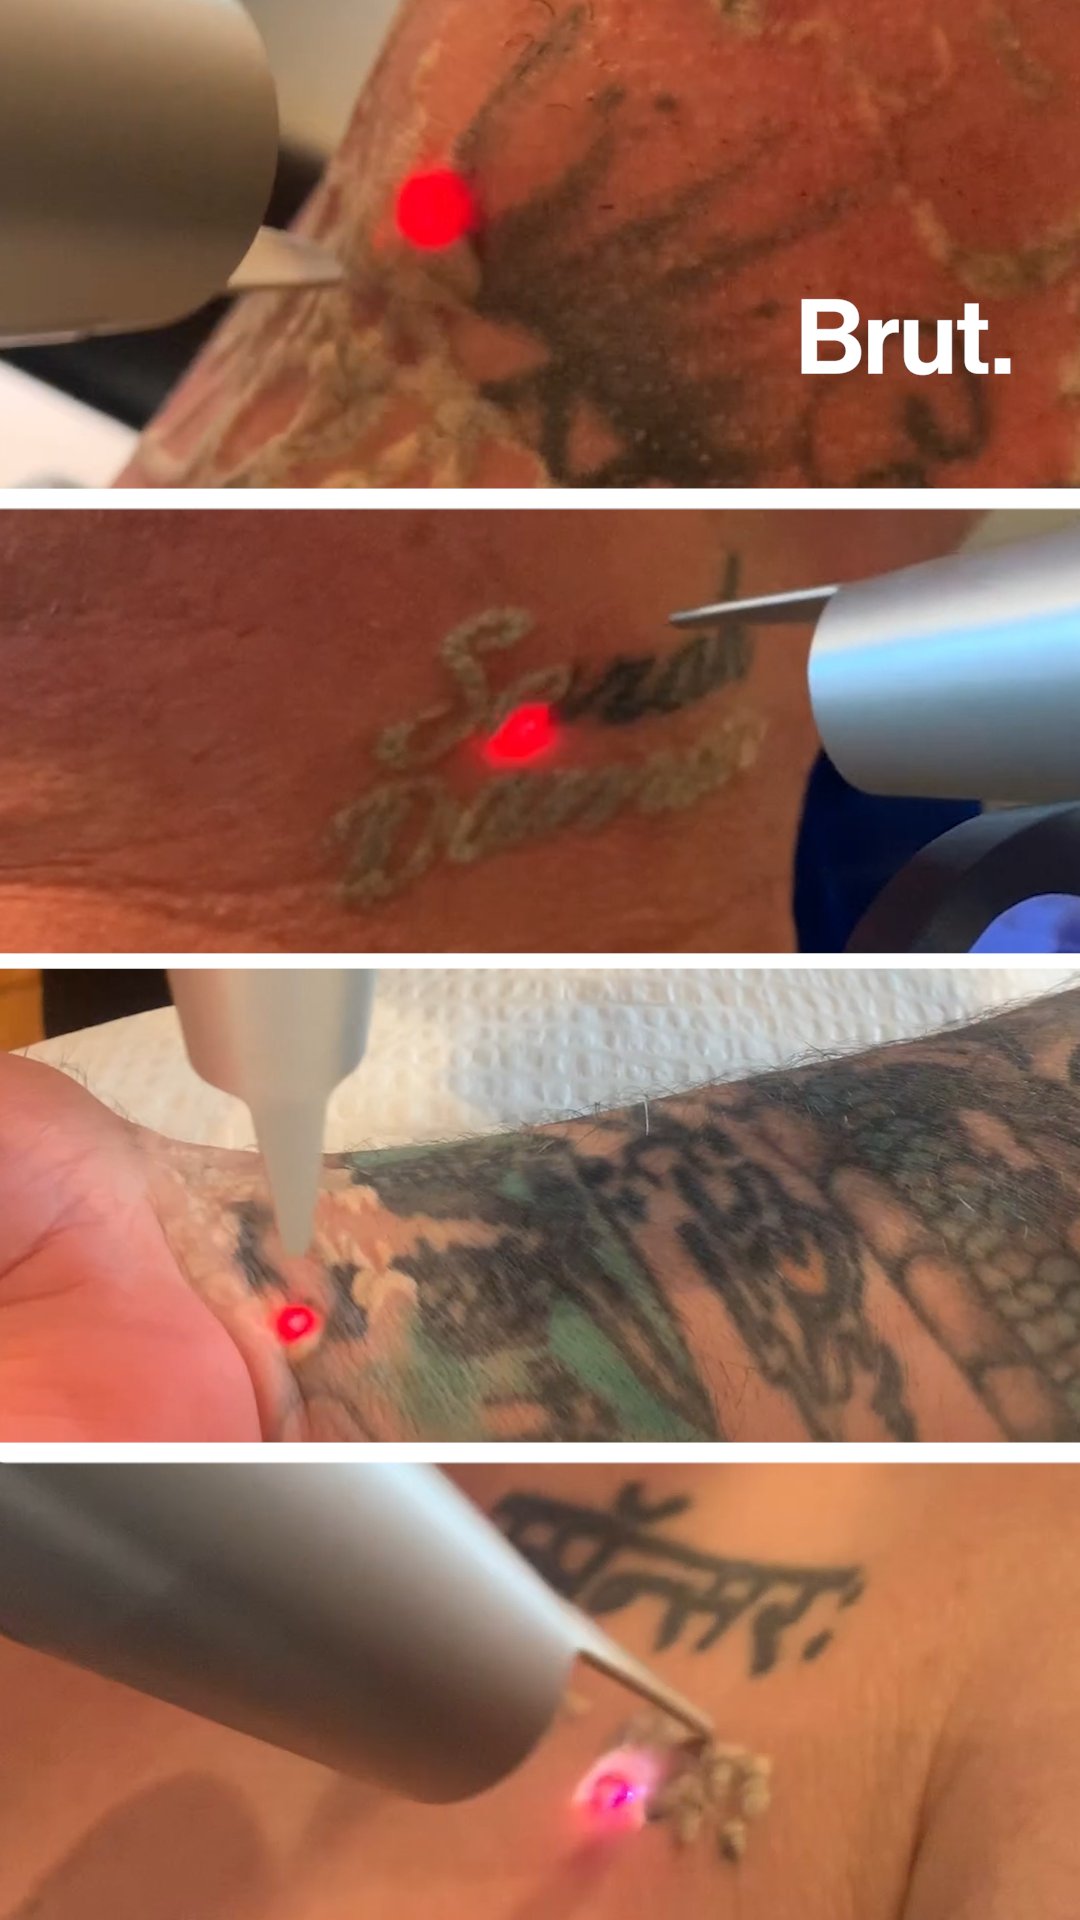 Free tattoo removal to transform lives